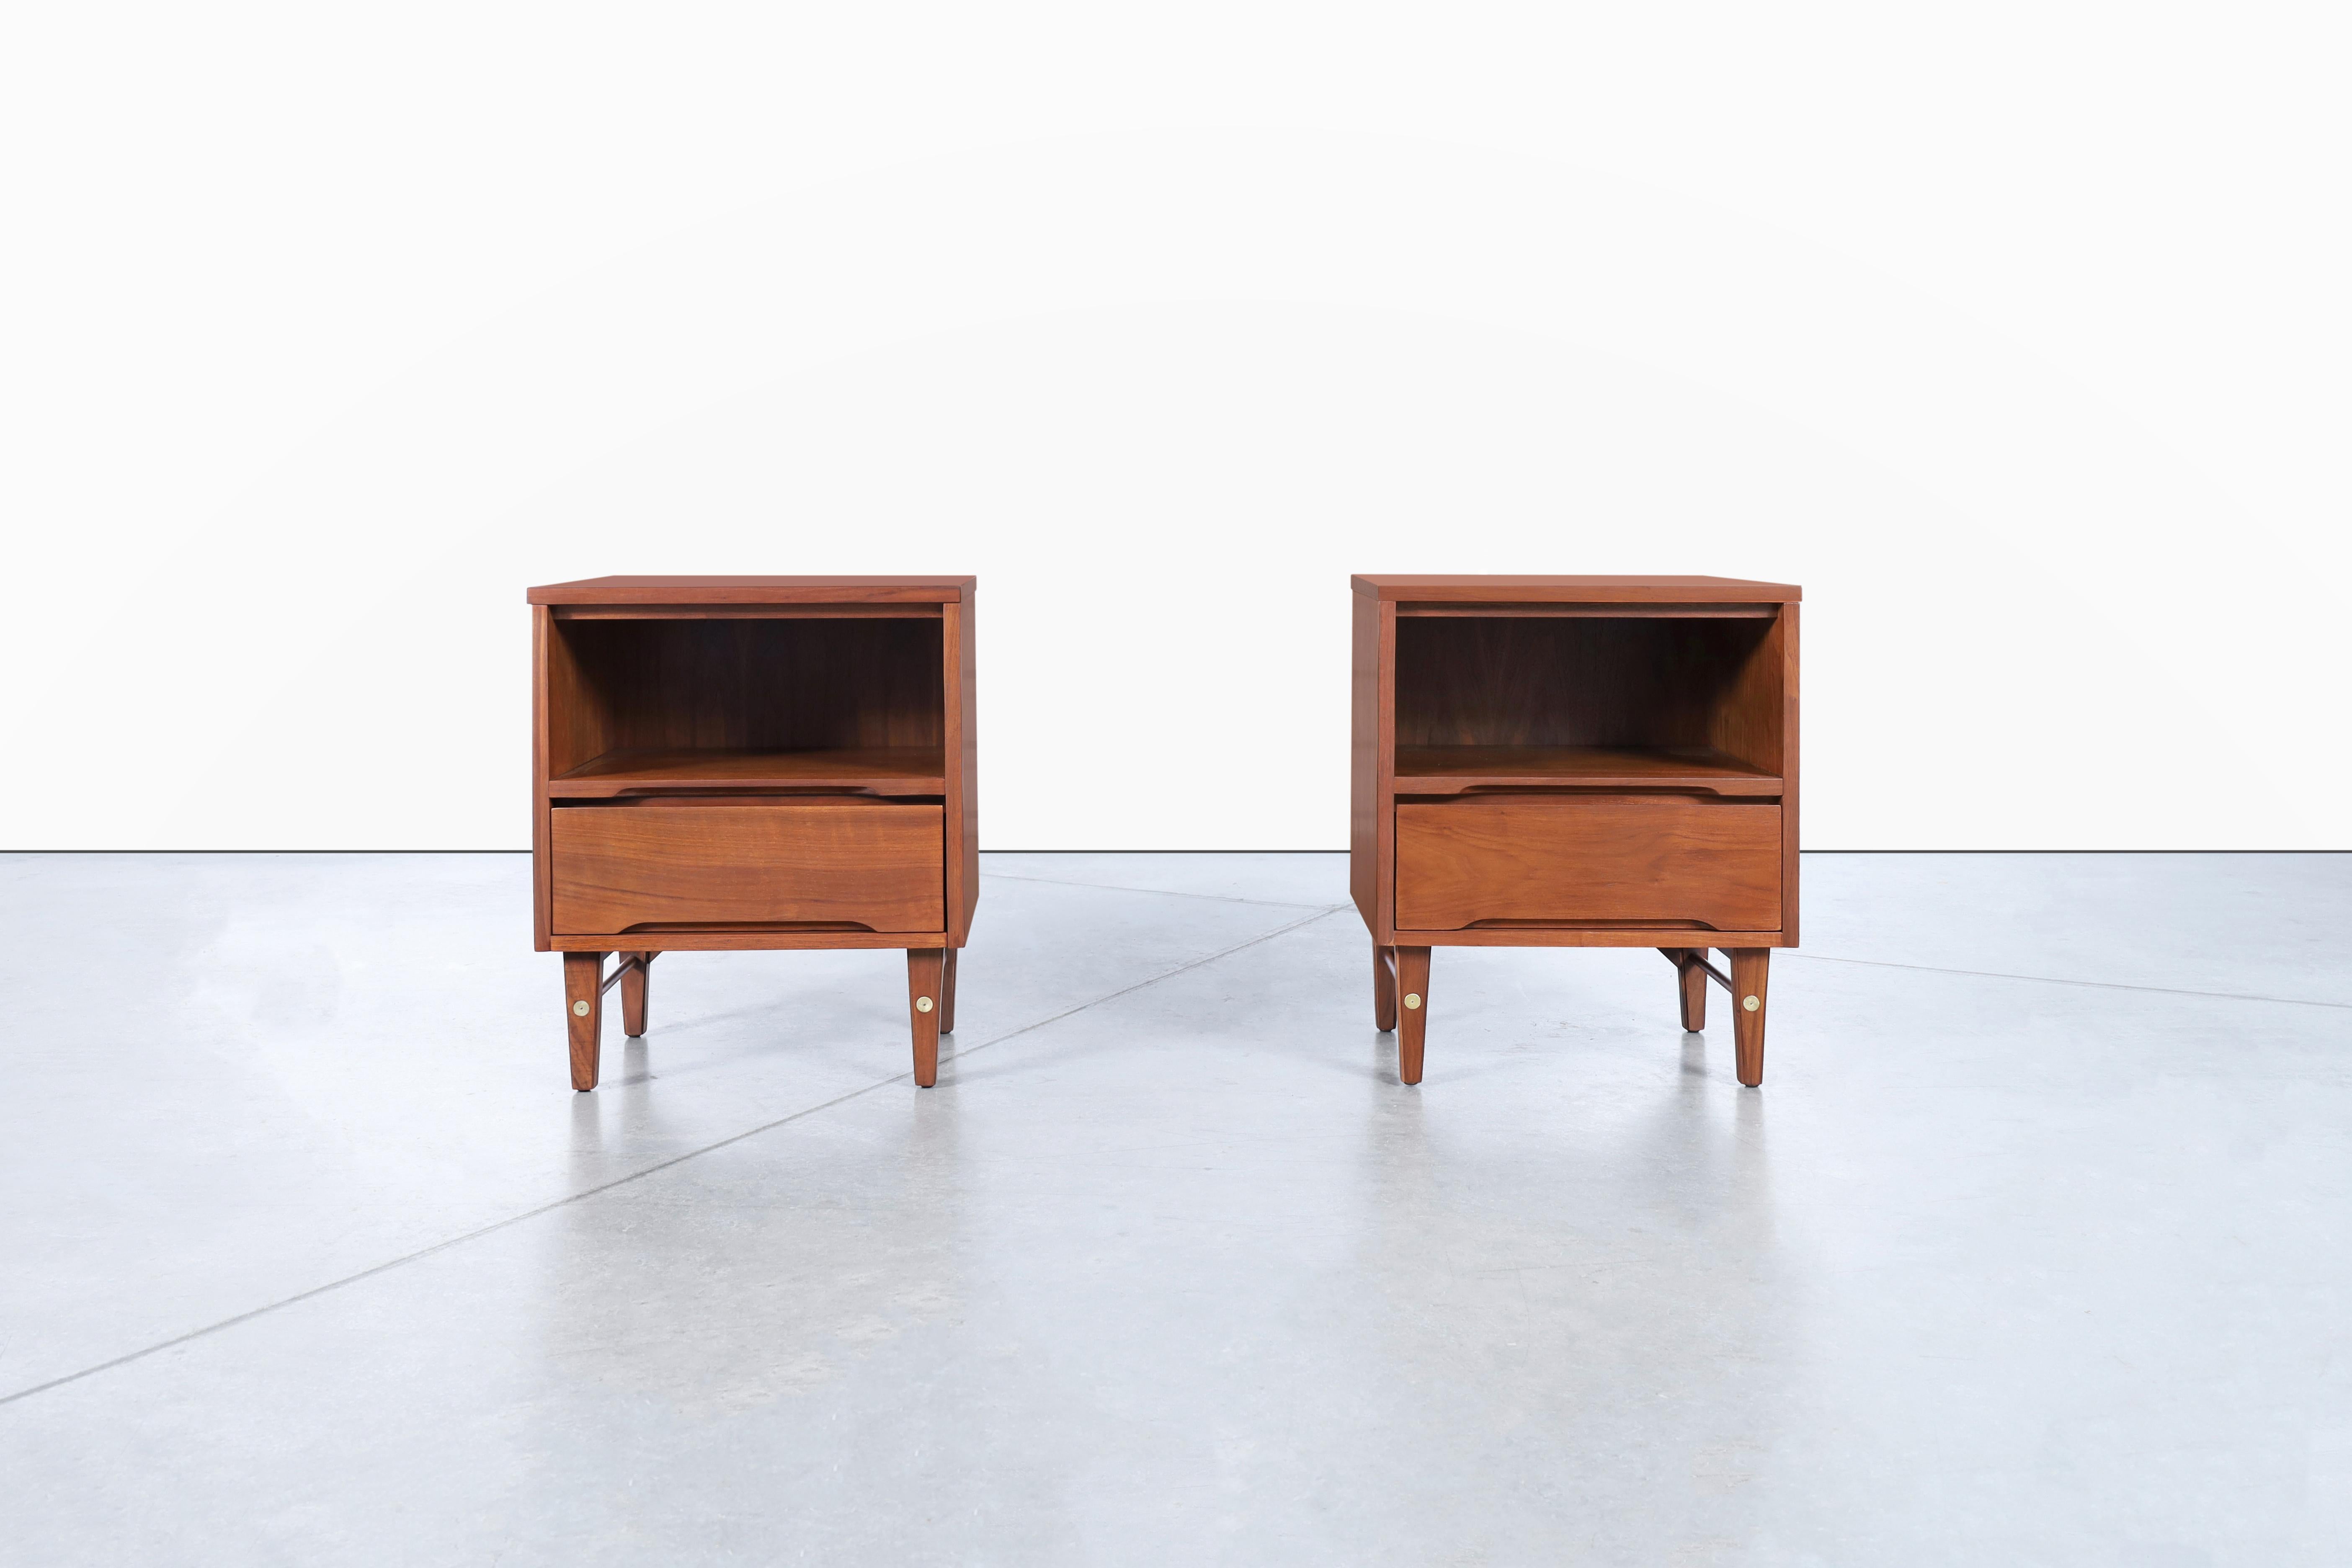 This set of mid-century modern walnut nightstands by Stanley Furniture is a true gem from the 1950s. Crafted from high-quality walnut, they have been refinished to restore their original beauty. Each nightstand features a single dovetail drawer with